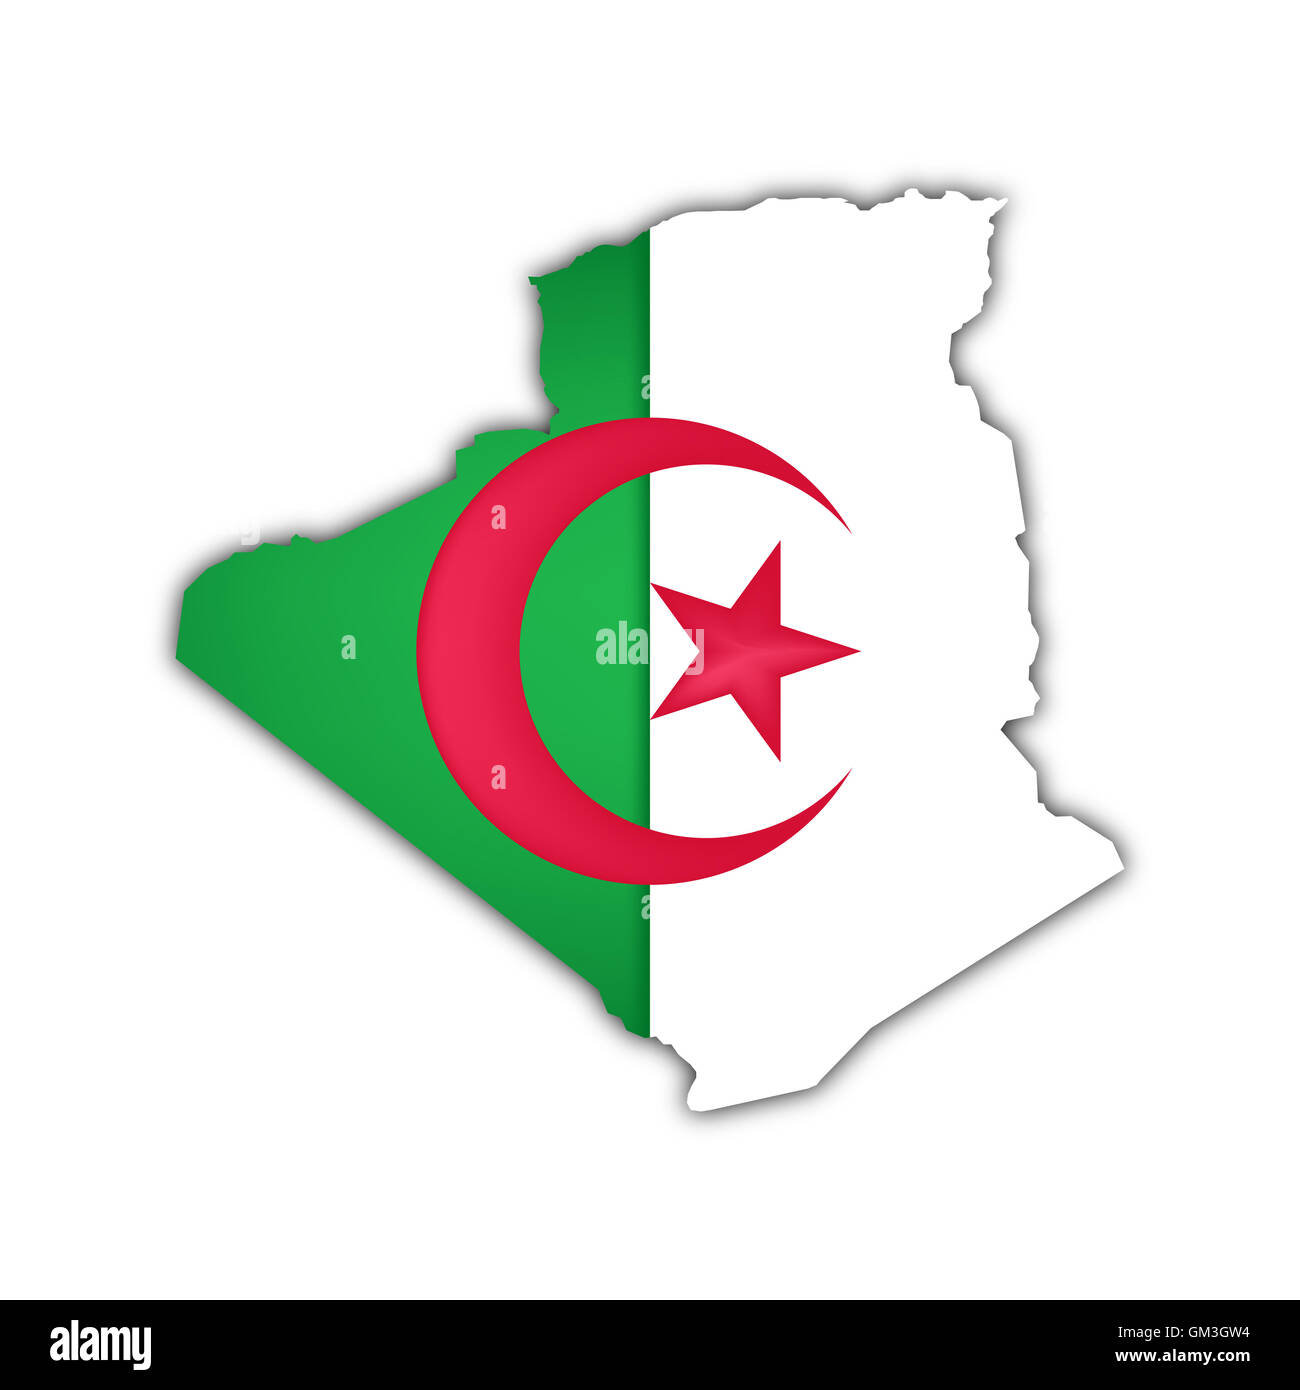 Outline map and flag of Algeria Stock Photo - Alamy